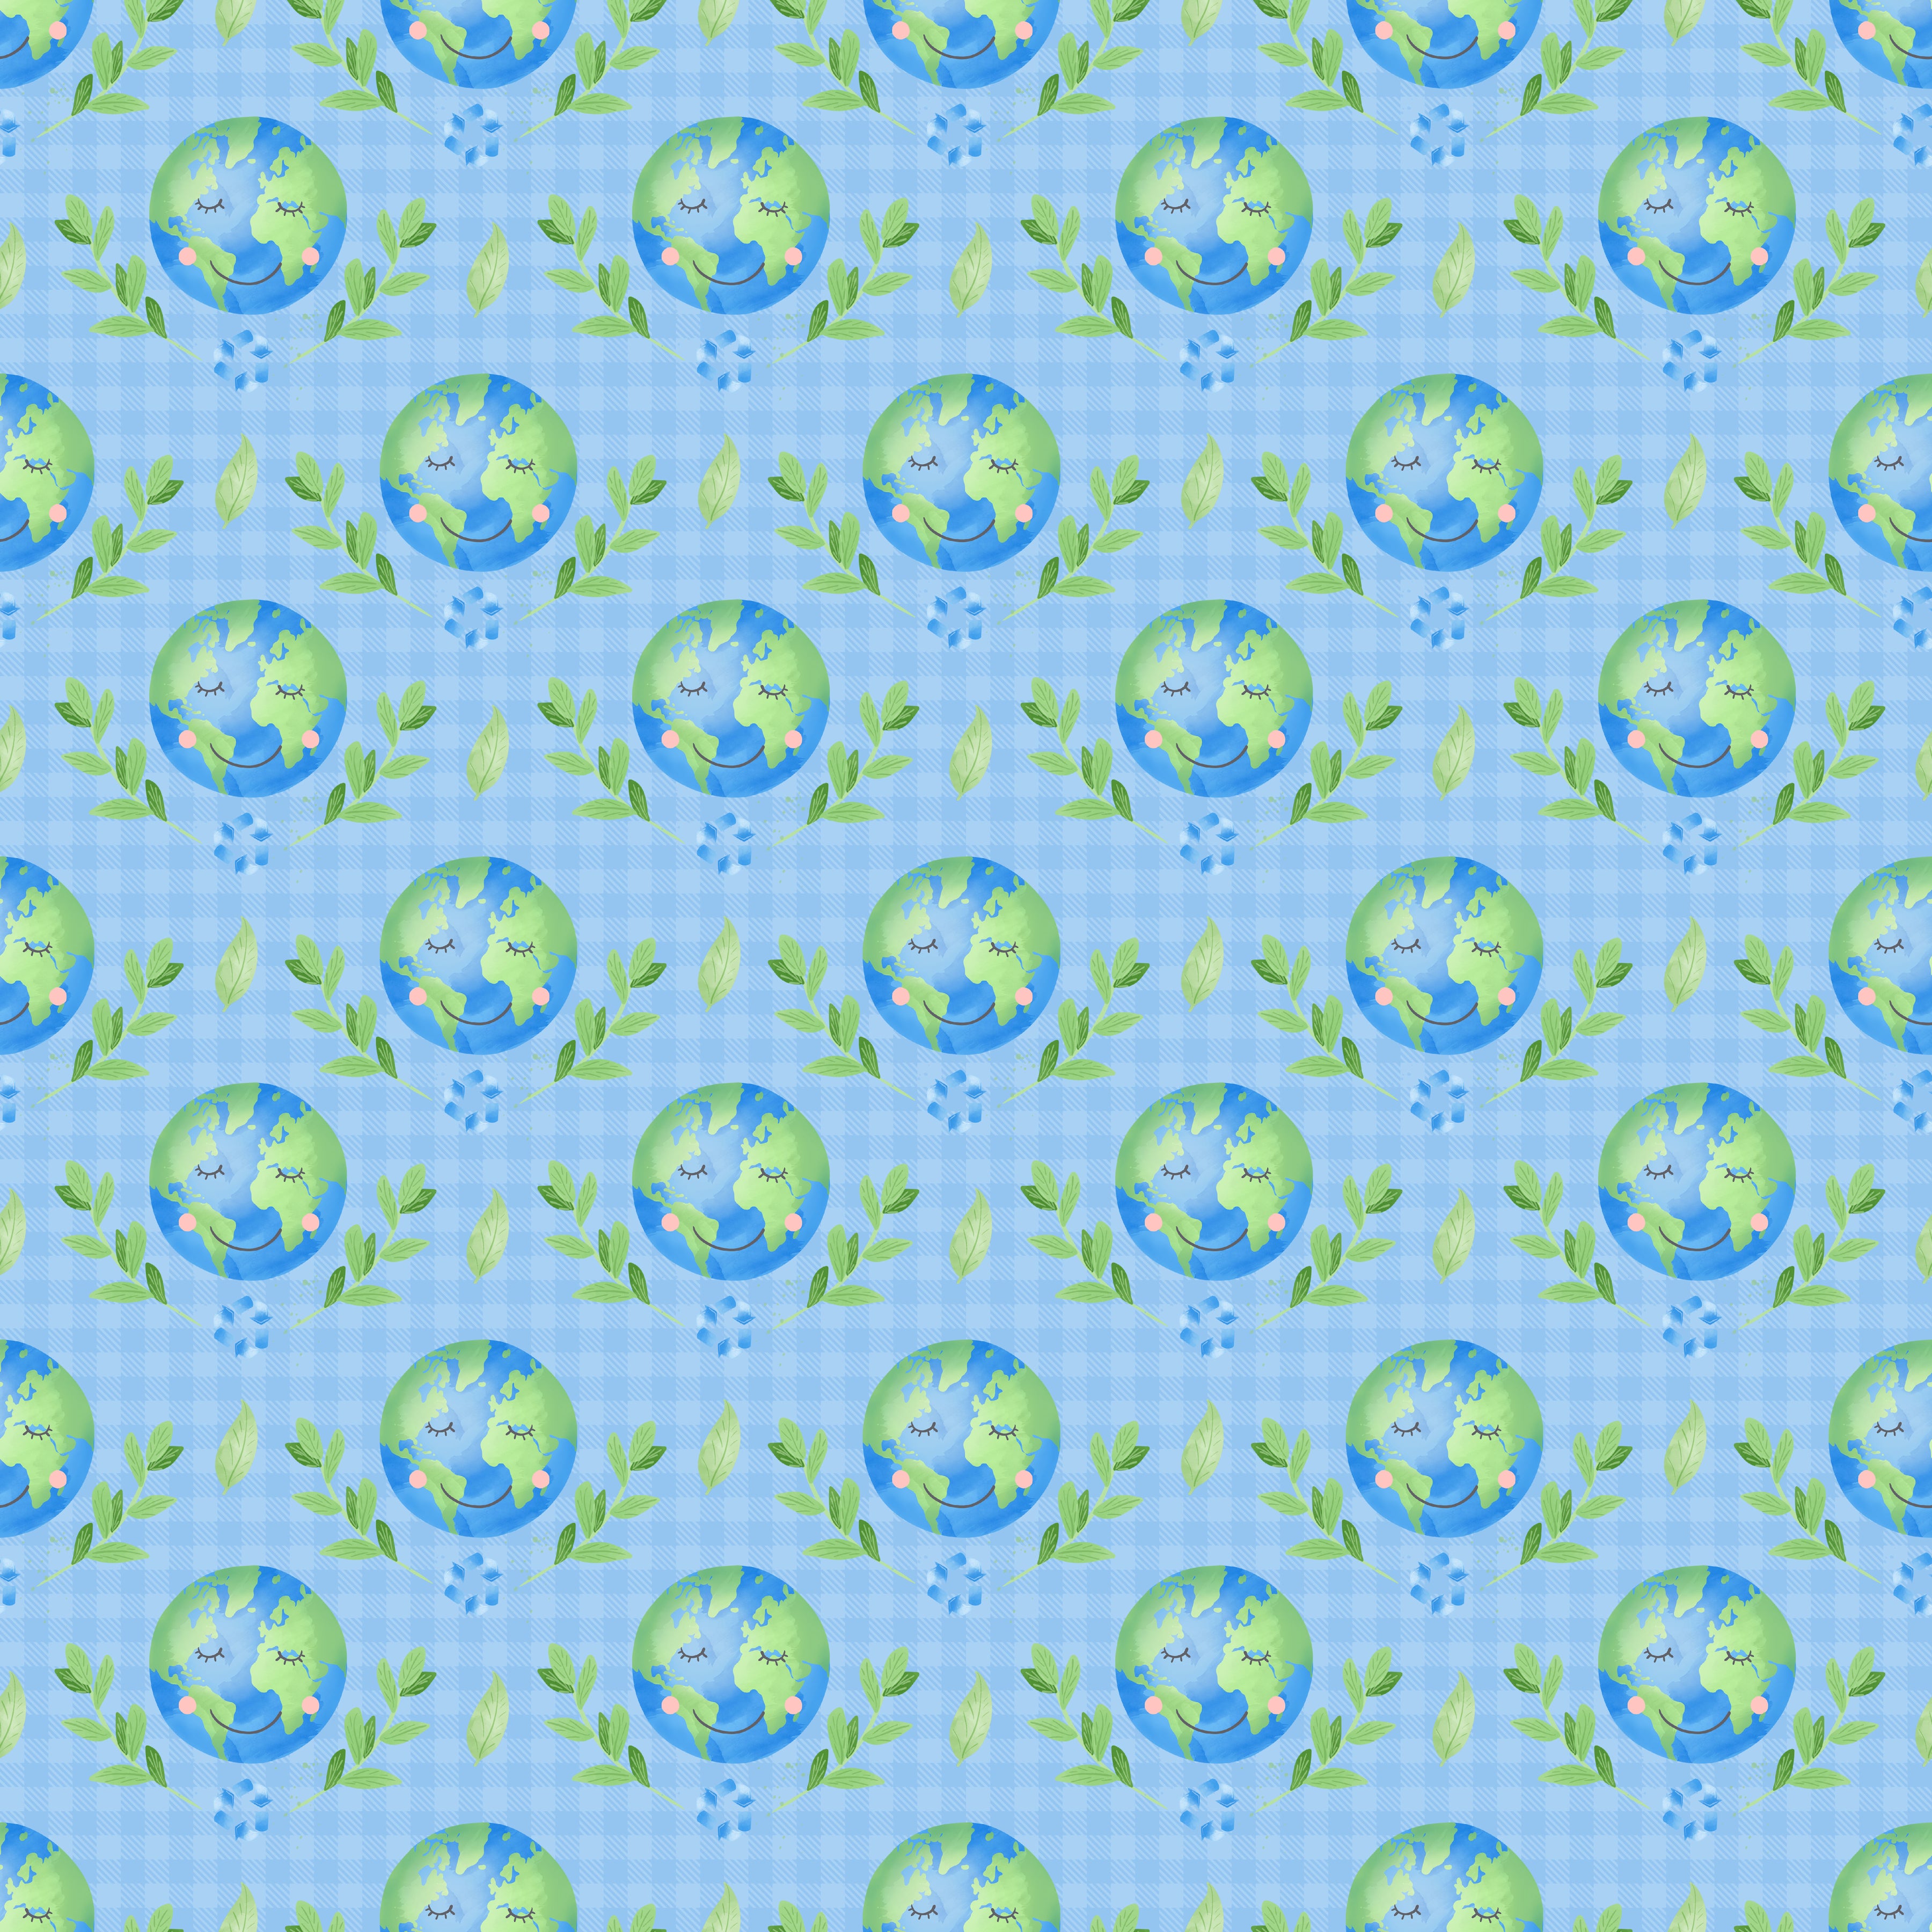 Earth Day Collection Earth Smiles When We Recycle 12 x 12 Double-Sided Scrapbook Paper by SSC Designs